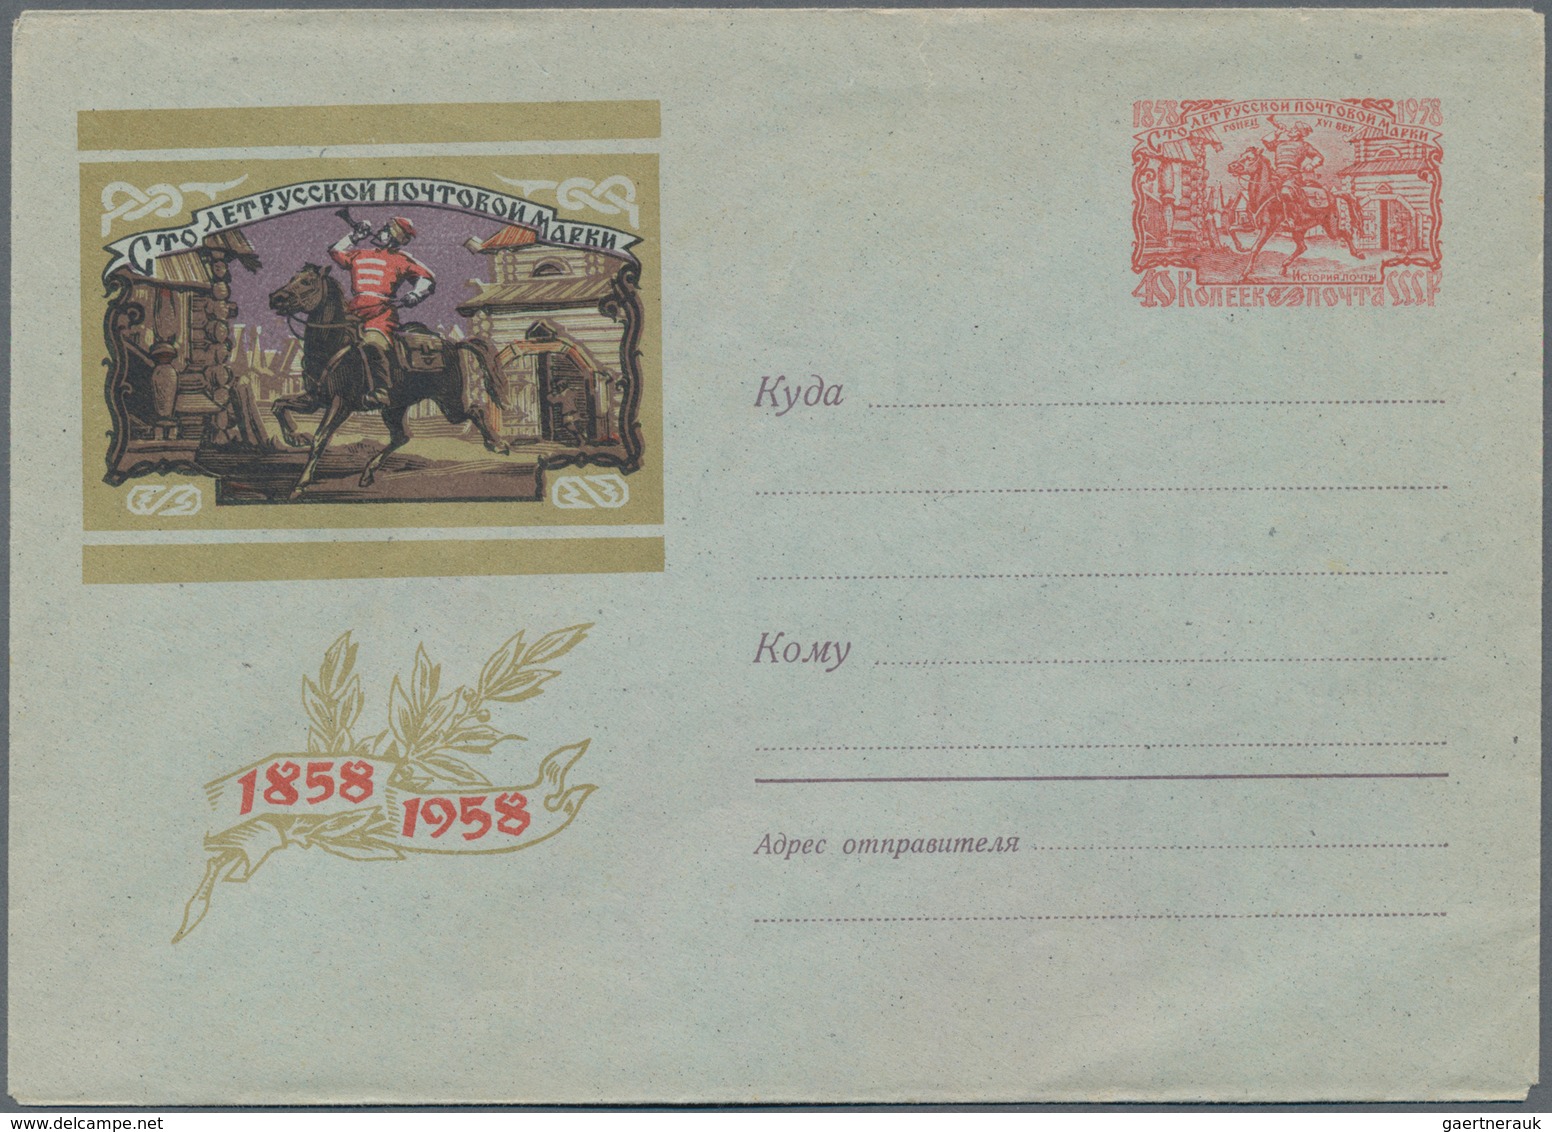 Sowjetunion - Ganzsachen: 1958 Unused Picture Envelope With Special Value Stamp USo 2IX On The Occas - Unclassified